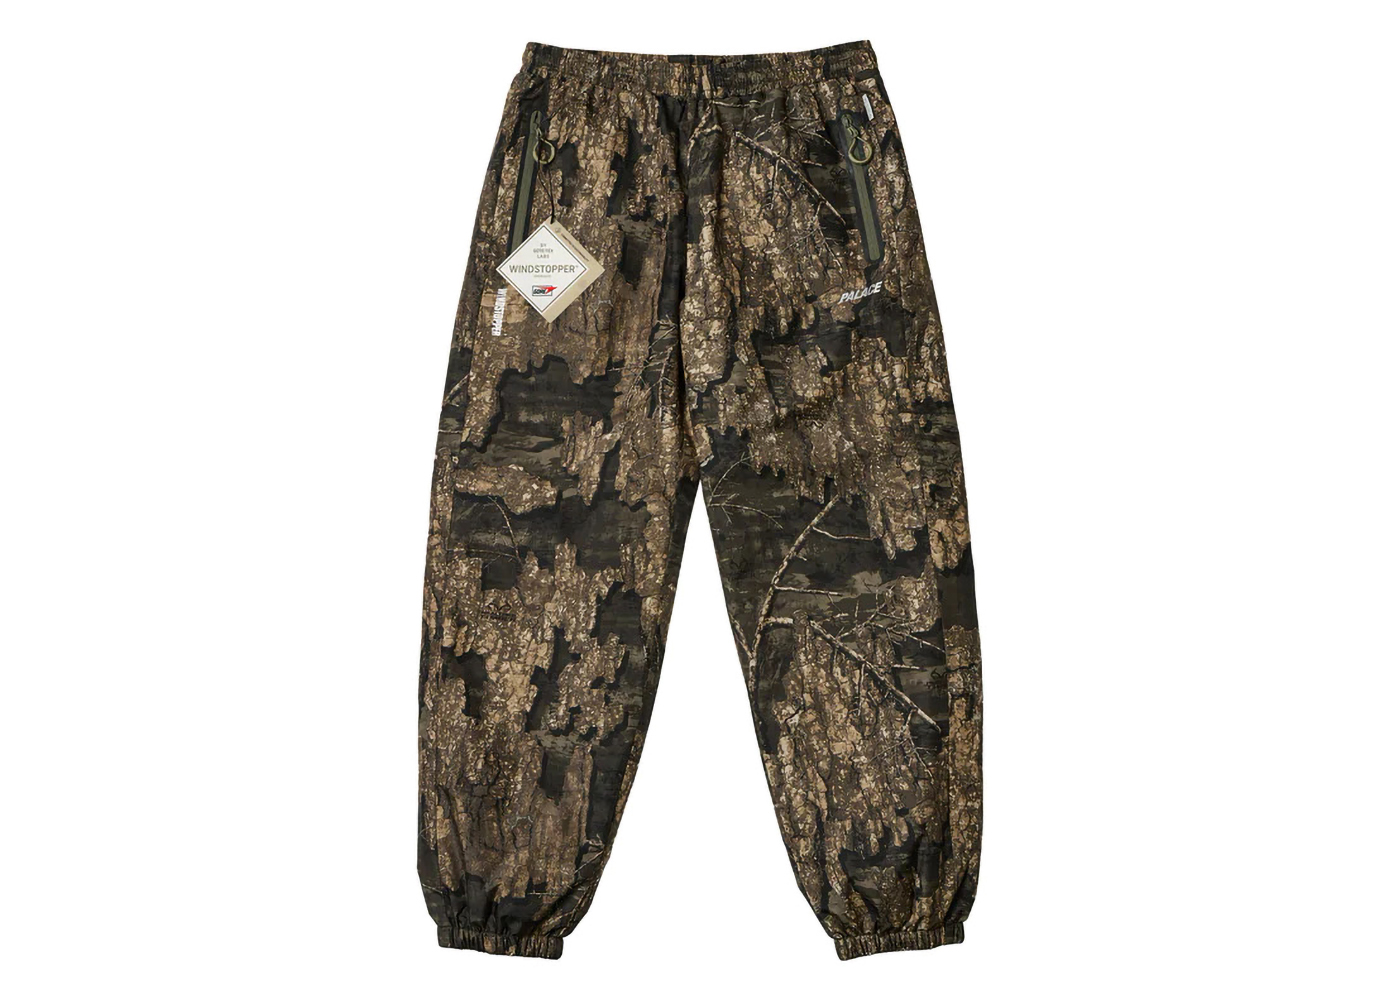 Palace GORE-TEX Windstopper Jogger Realtree Timber Men's